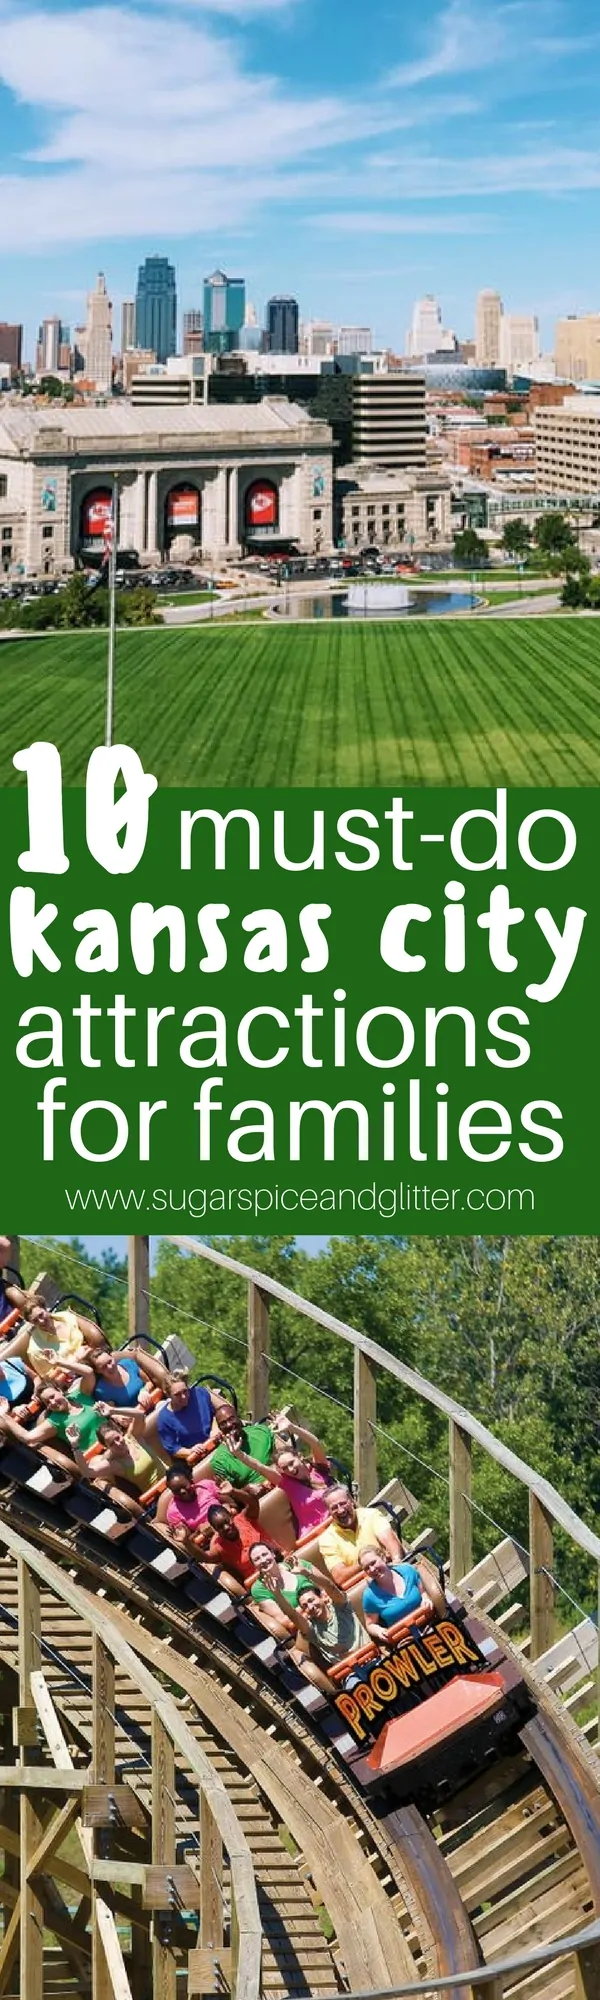 Kansas city is so much more than BBQ, Jazz and Fountains - though any trip to the city would be remiss without indulging in all three! Check out our list of the top 10 Must-do Kansas City Attractions for families